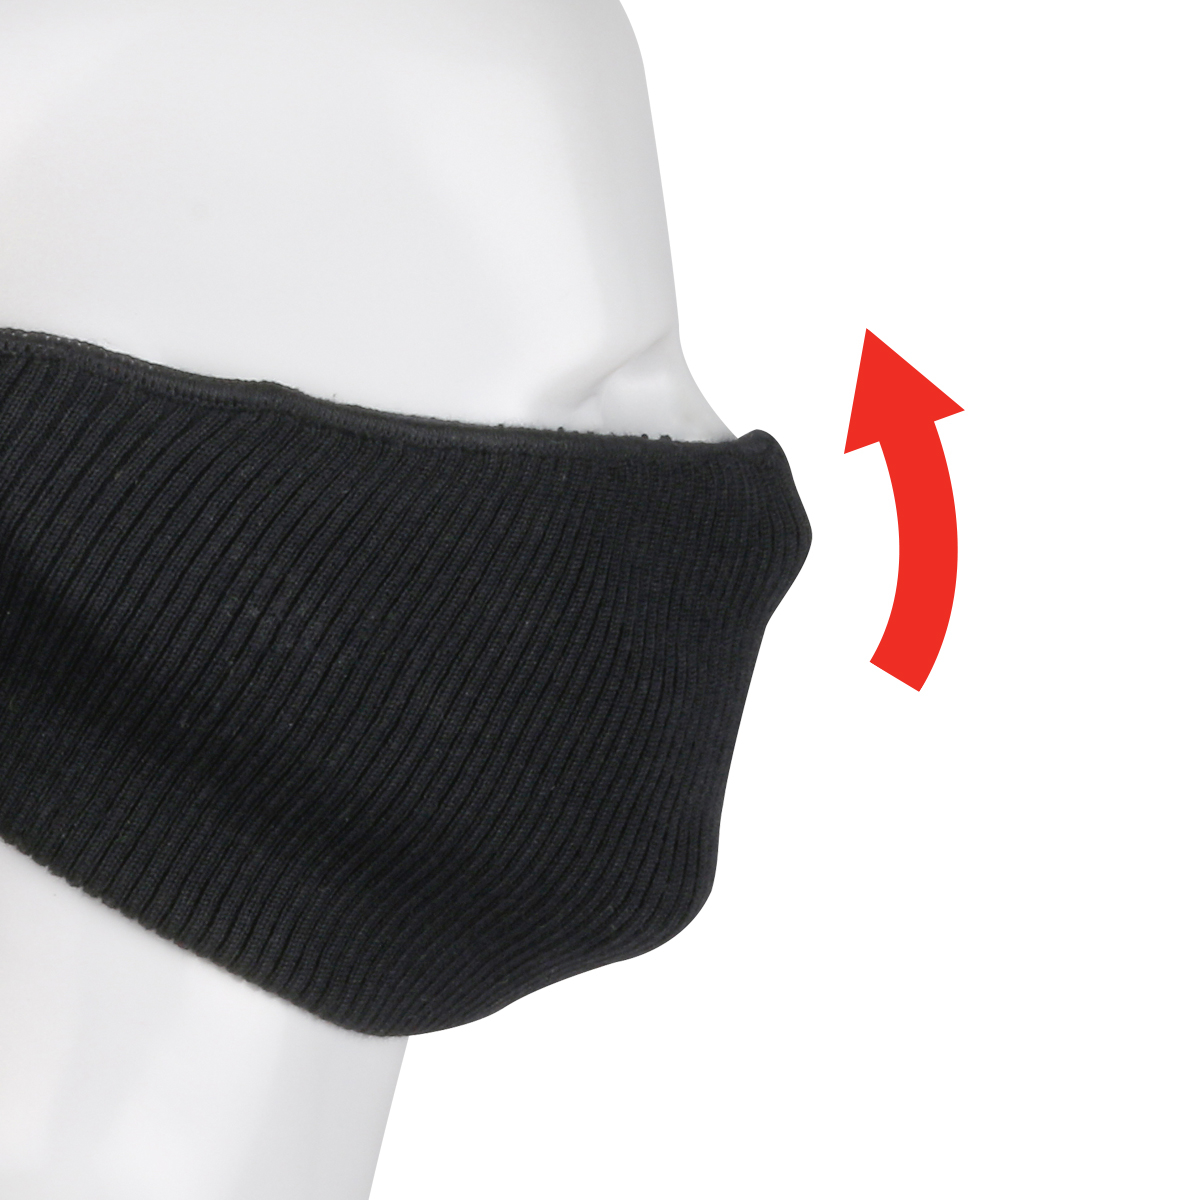 PIP 2-Ply Ribbed Knit Face Cover with Filter Pocket from GME Supply